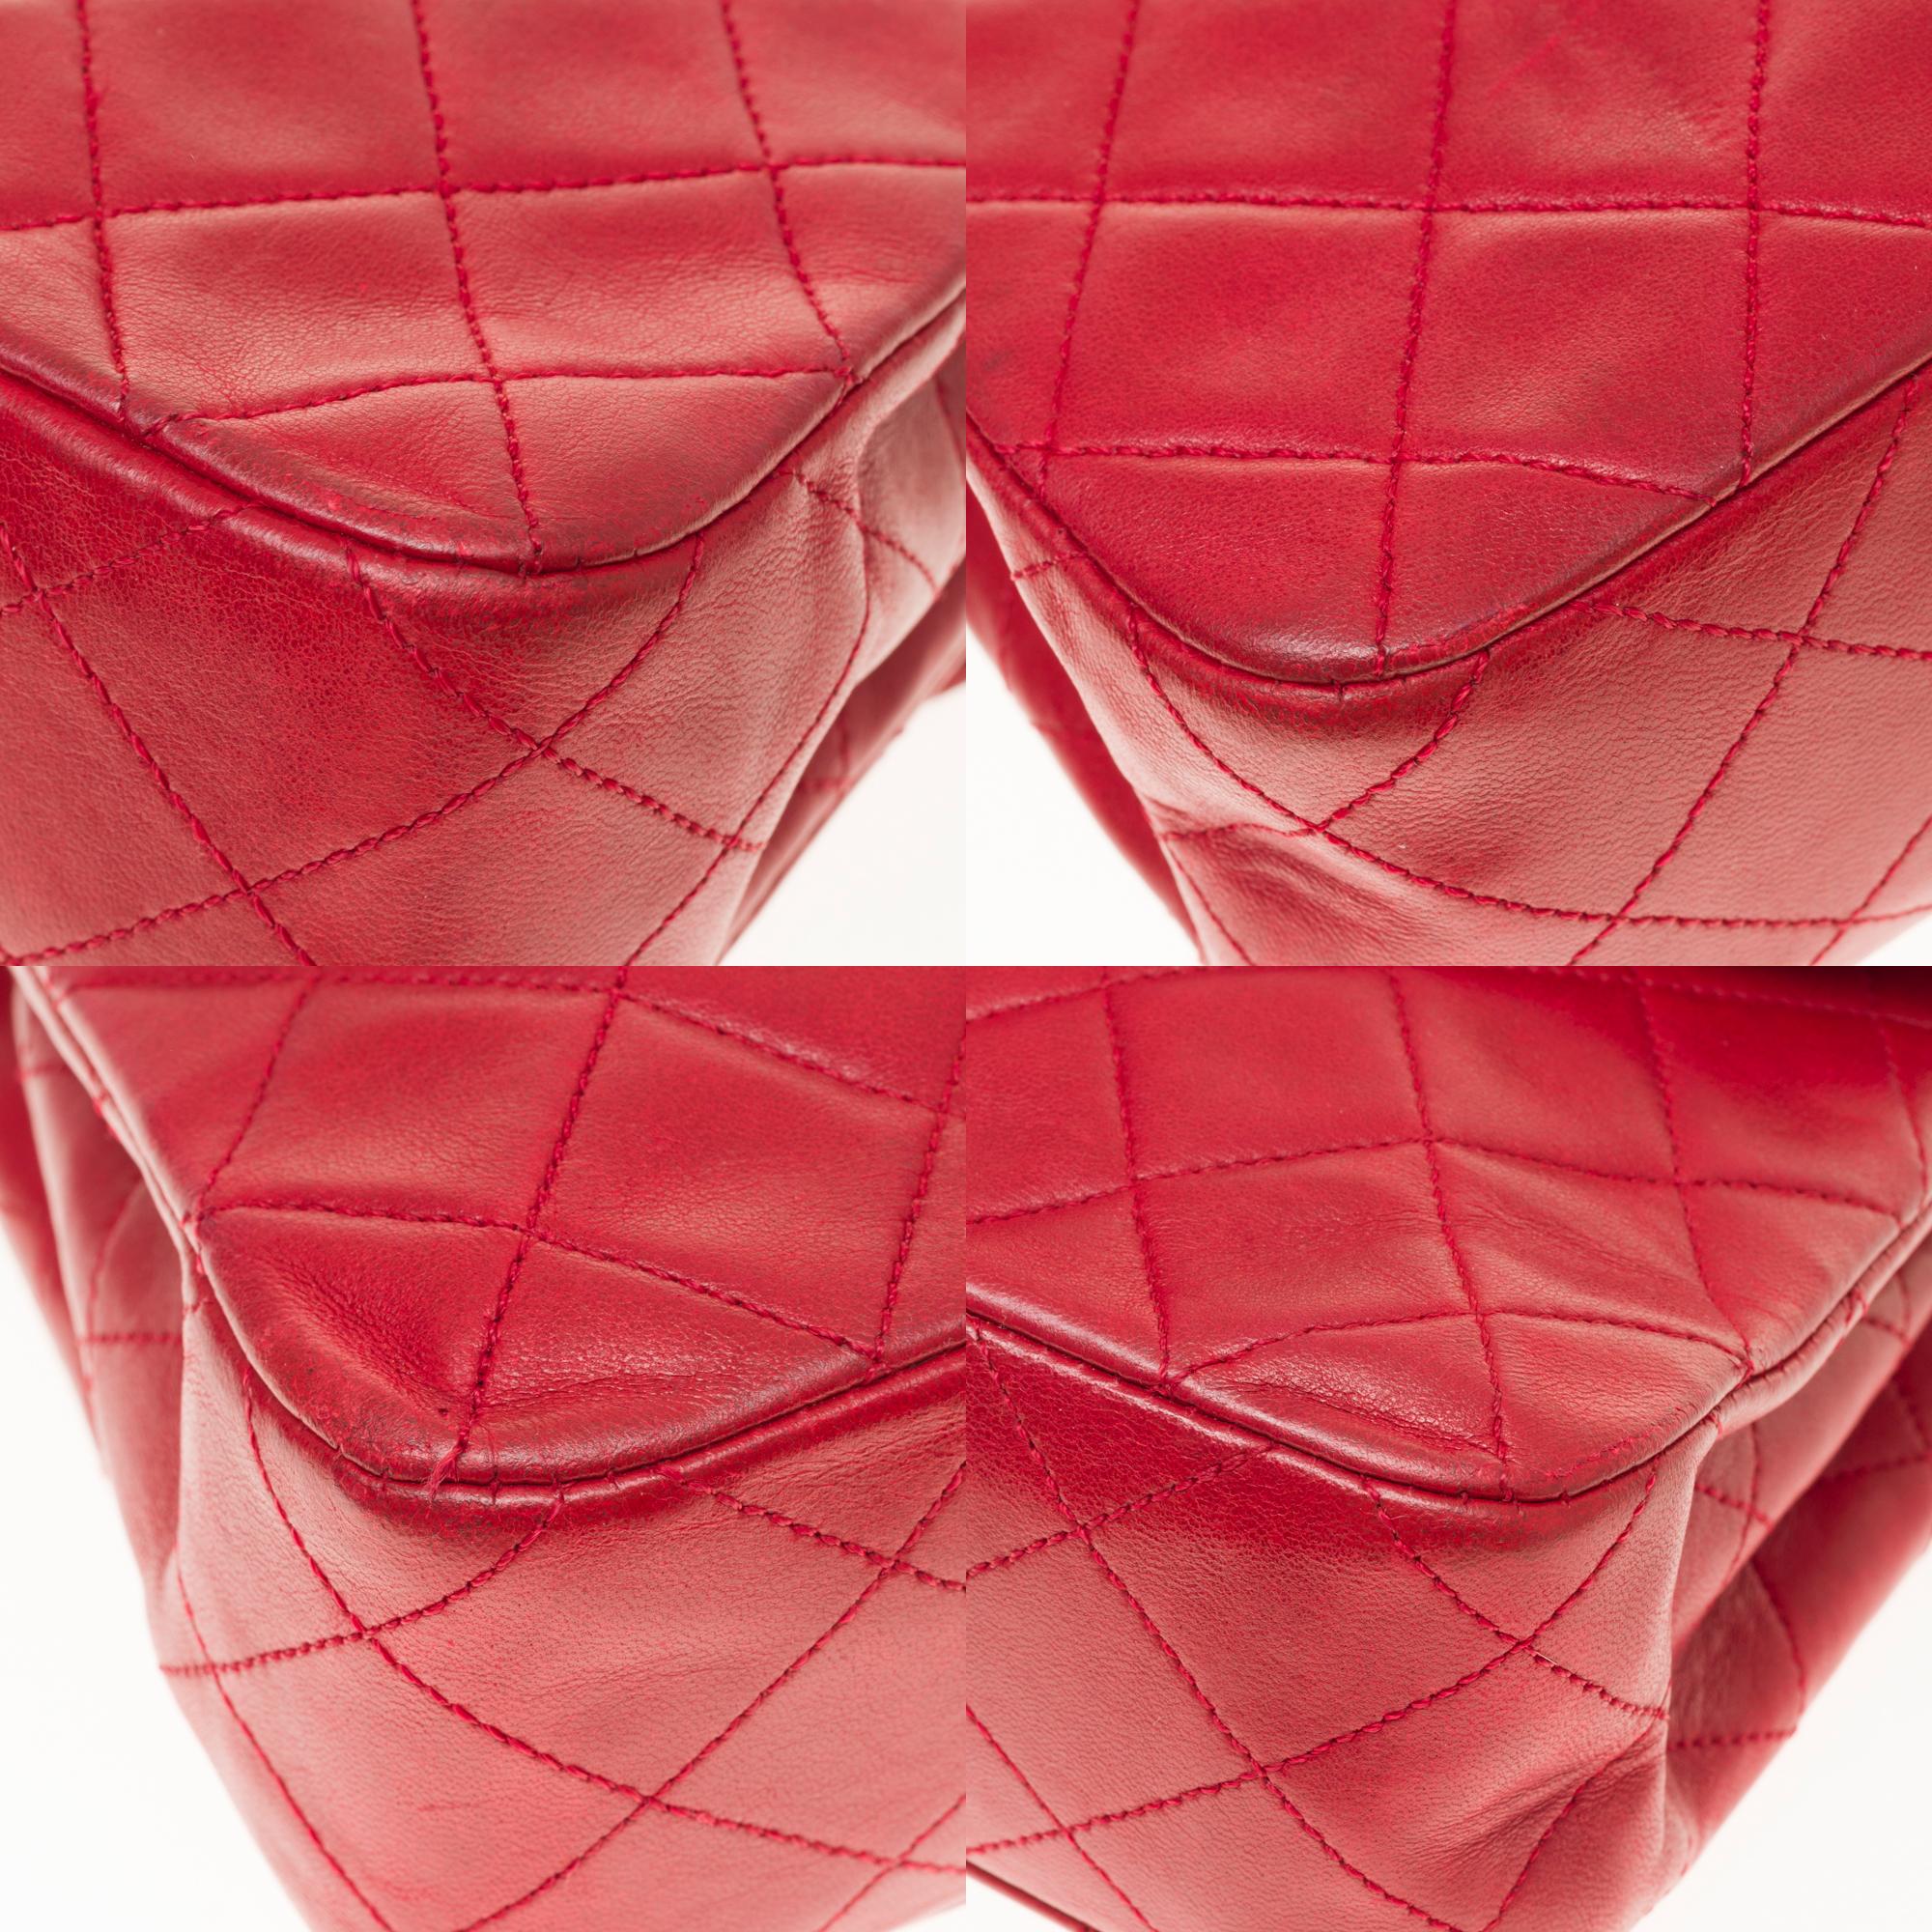 Chanel Classic Single Flap shoulder bag in Red quilted lambskin, GHW 6